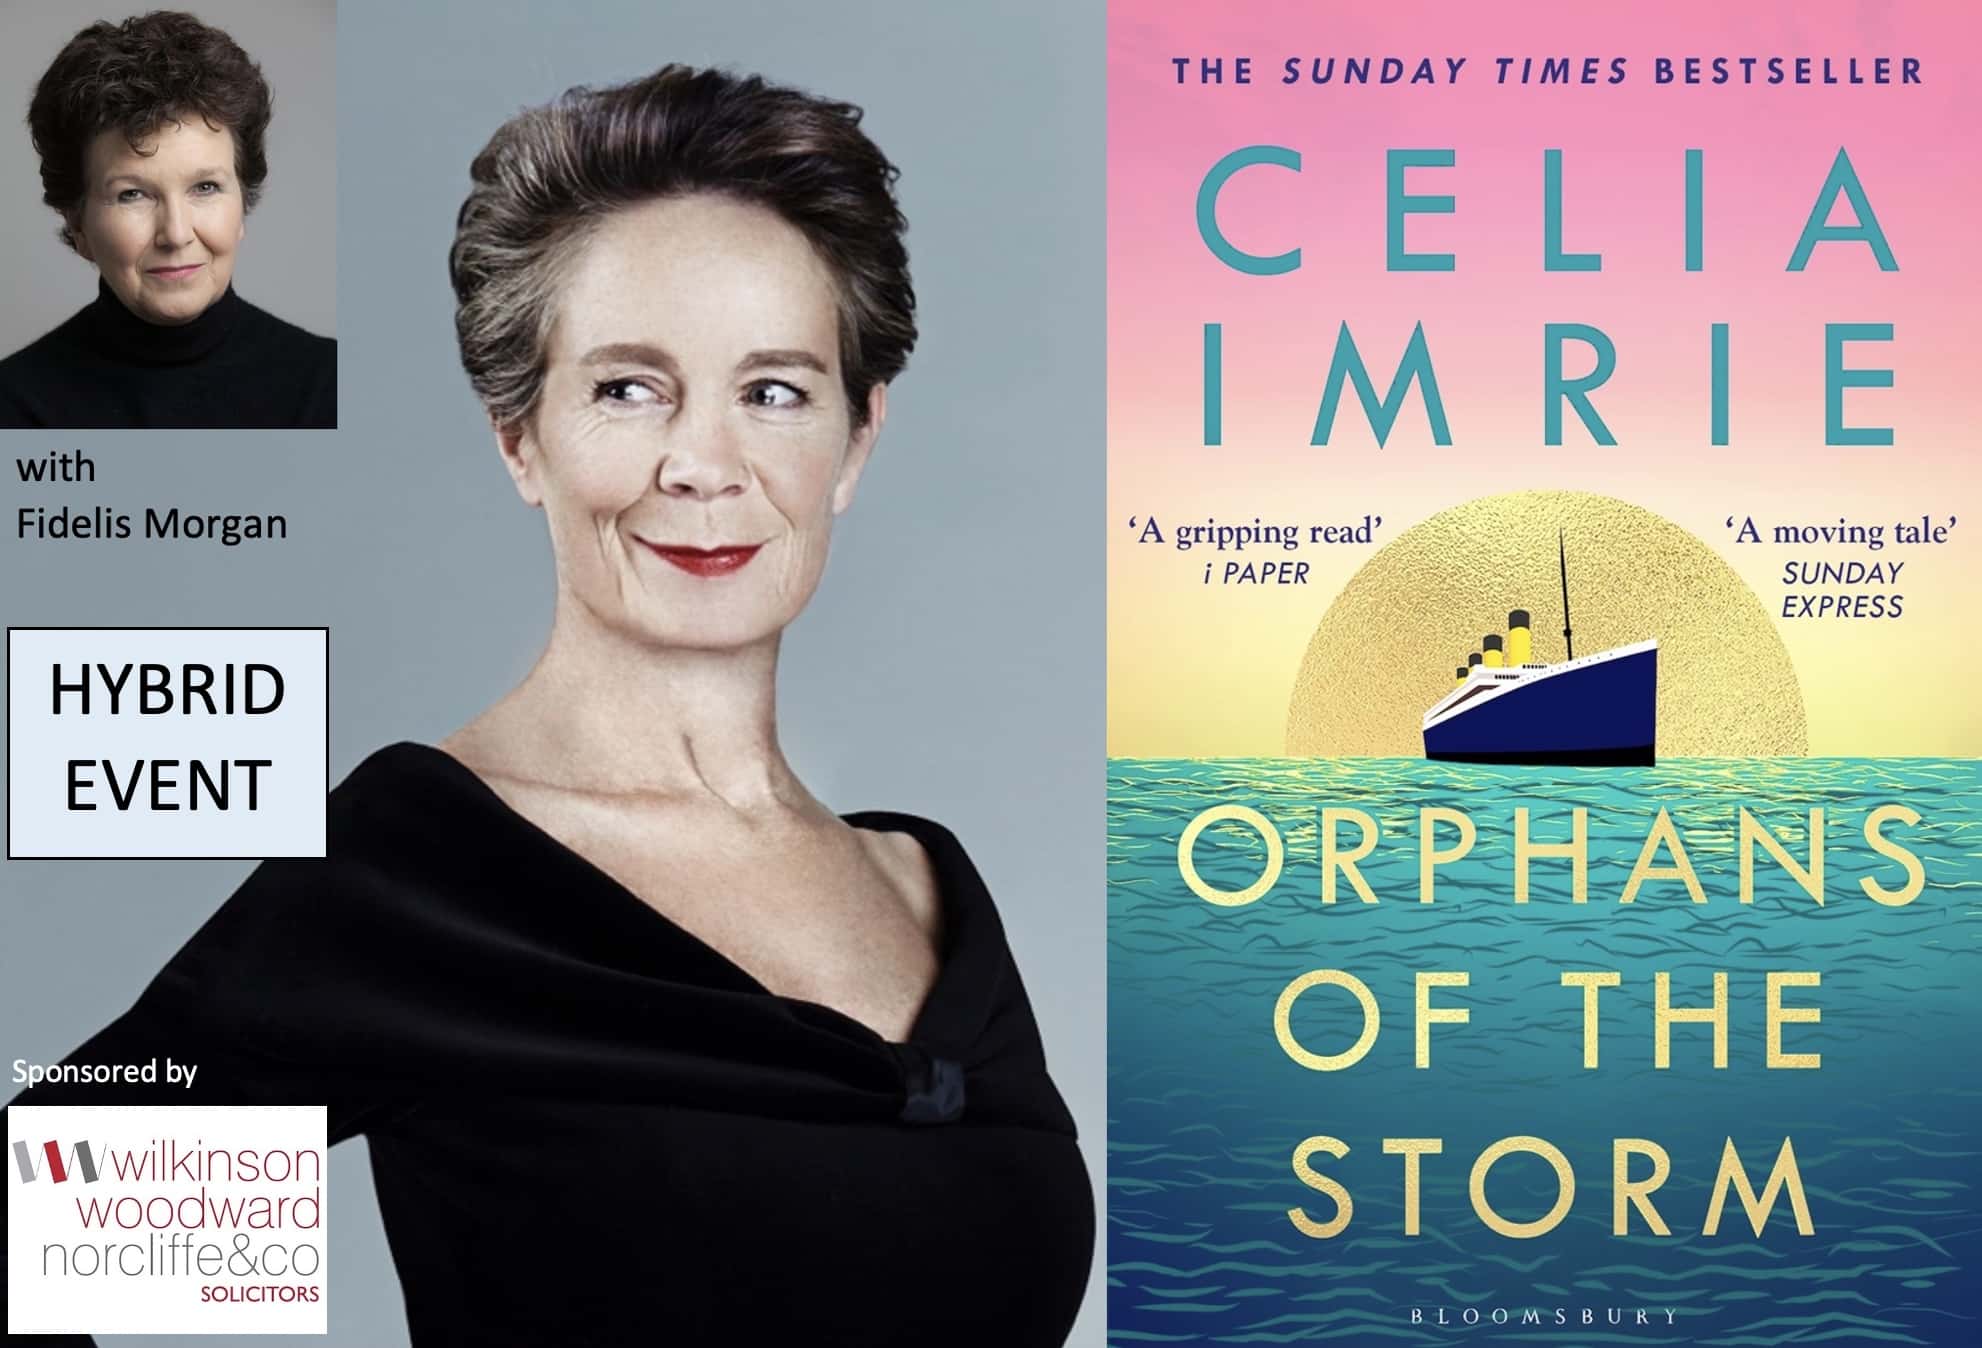 Celia Imrie – Orphans of the Storm